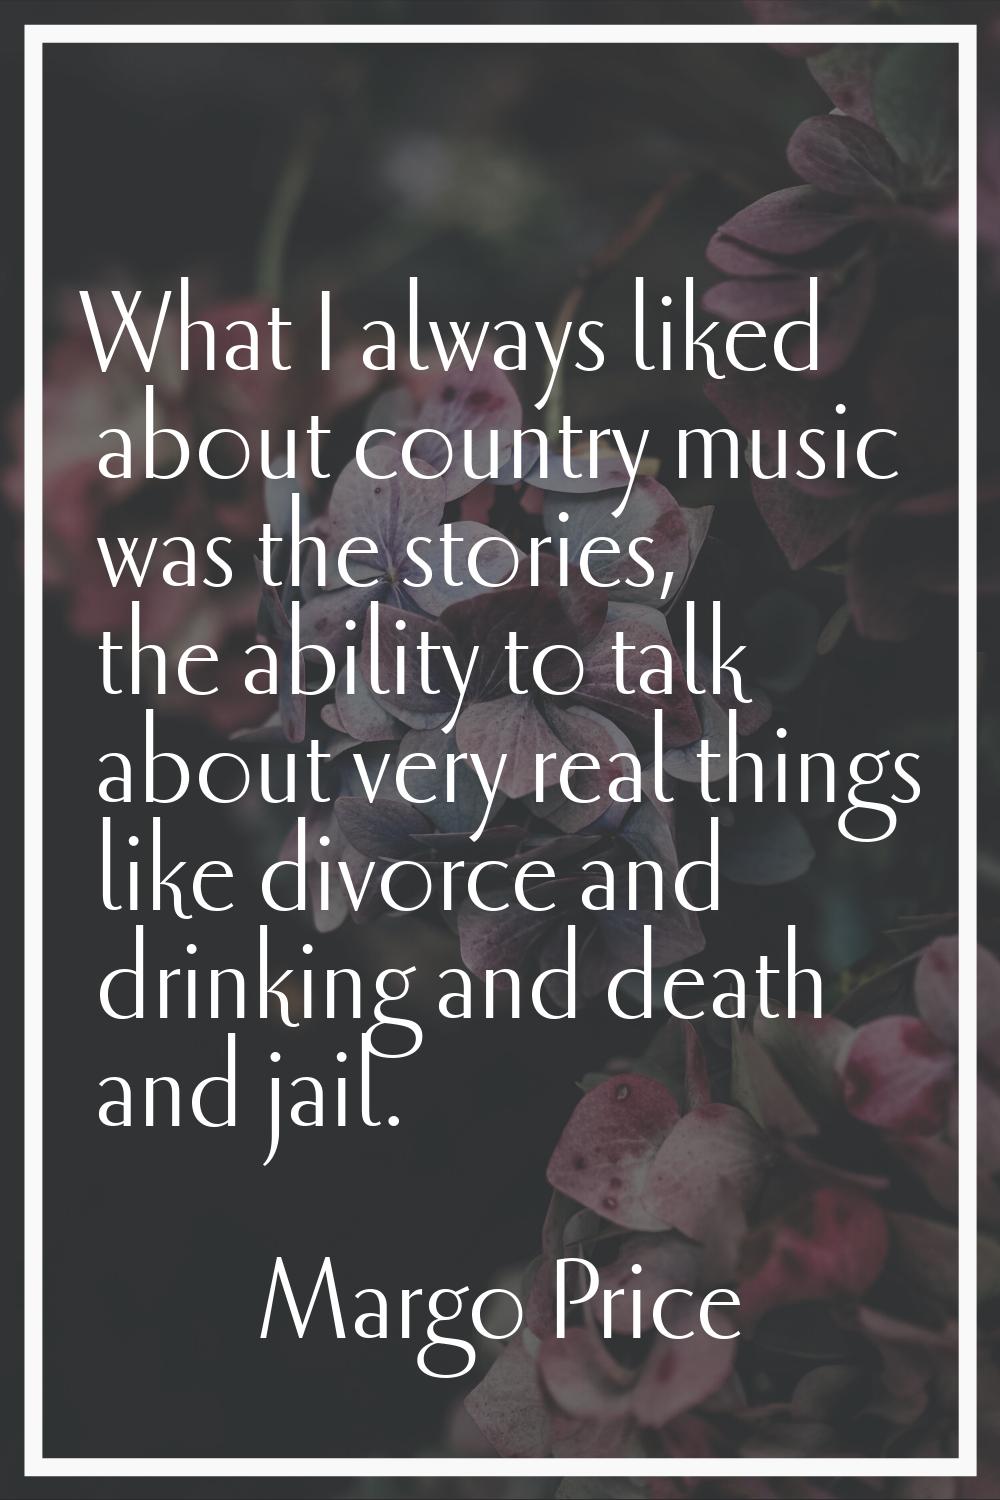 What I always liked about country music was the stories, the ability to talk about very real things